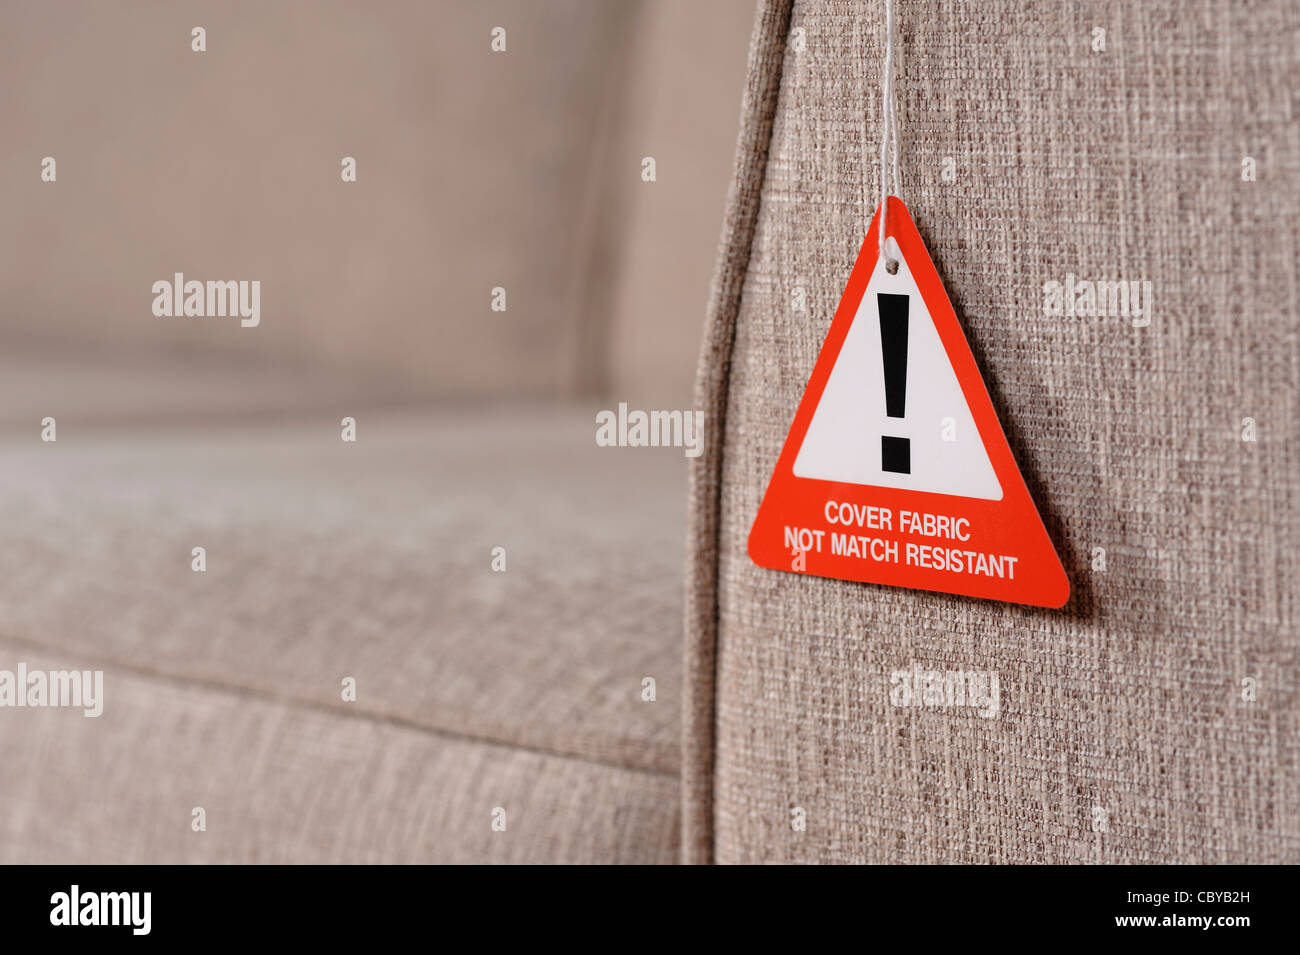 Sofa fire safety warning label Stock Photo